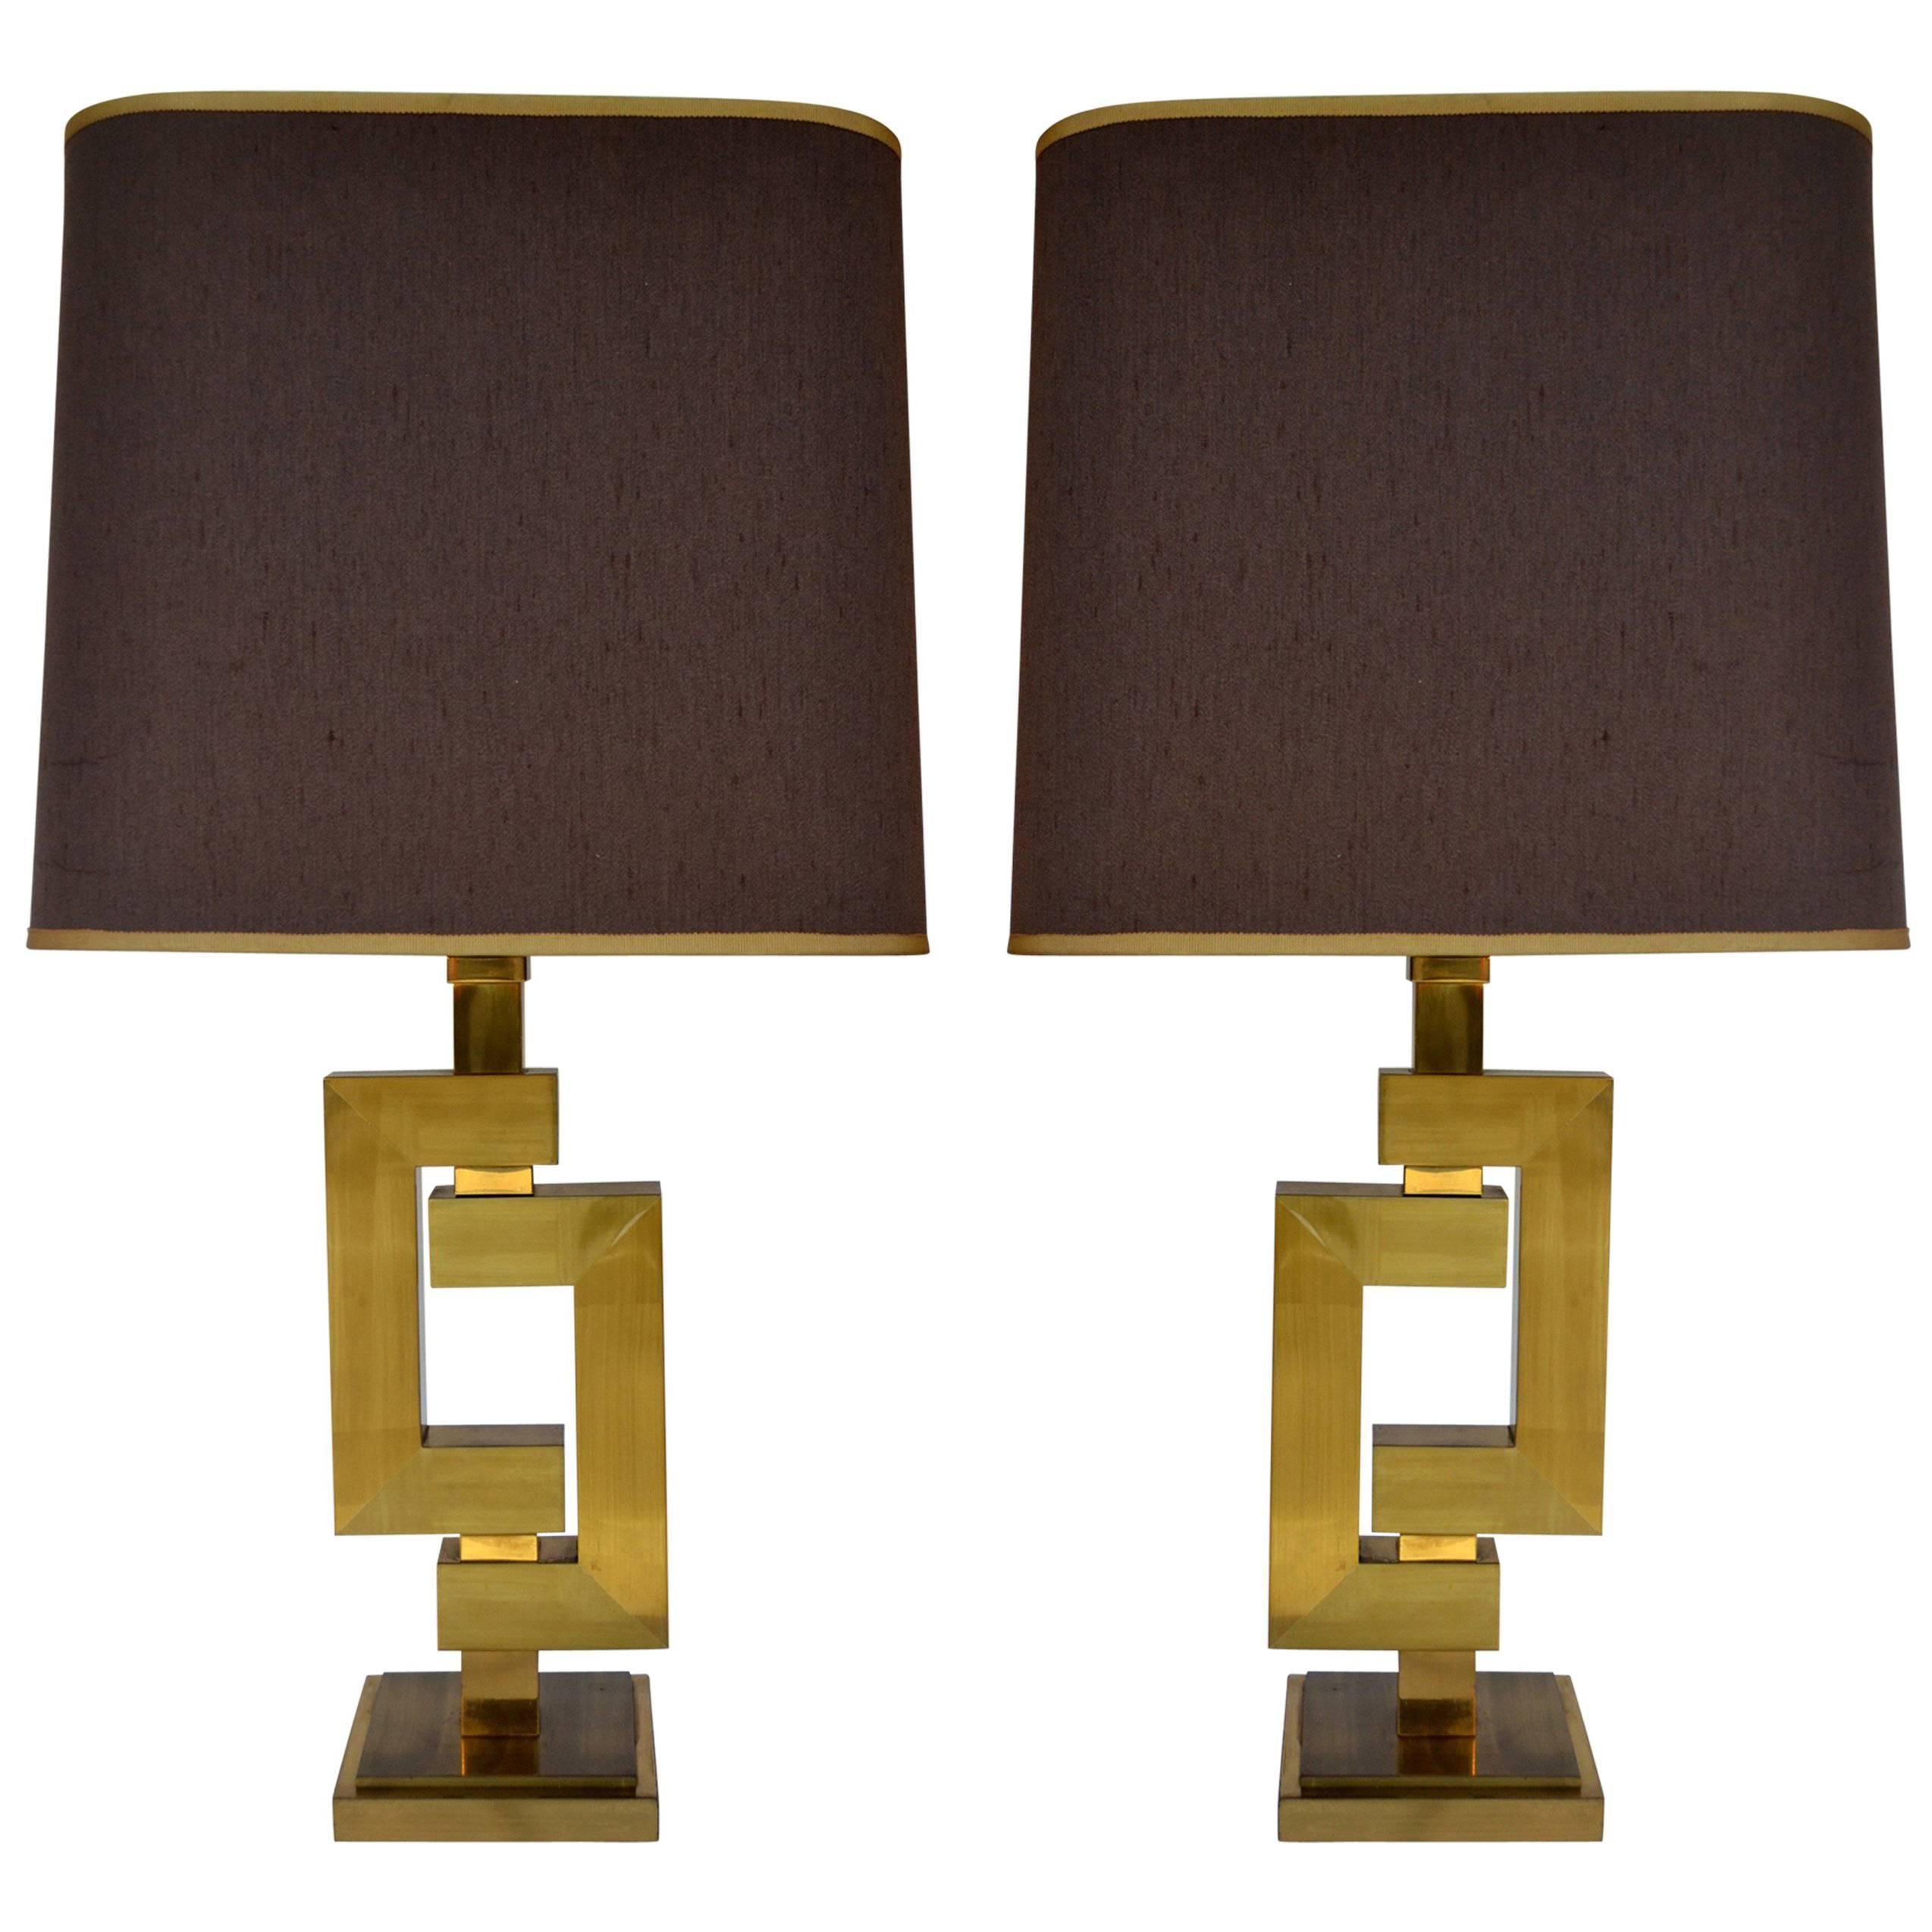 Pair of Sculptural Geometric Brass Table Lamps by Willy Rizzo for Romeo Rega